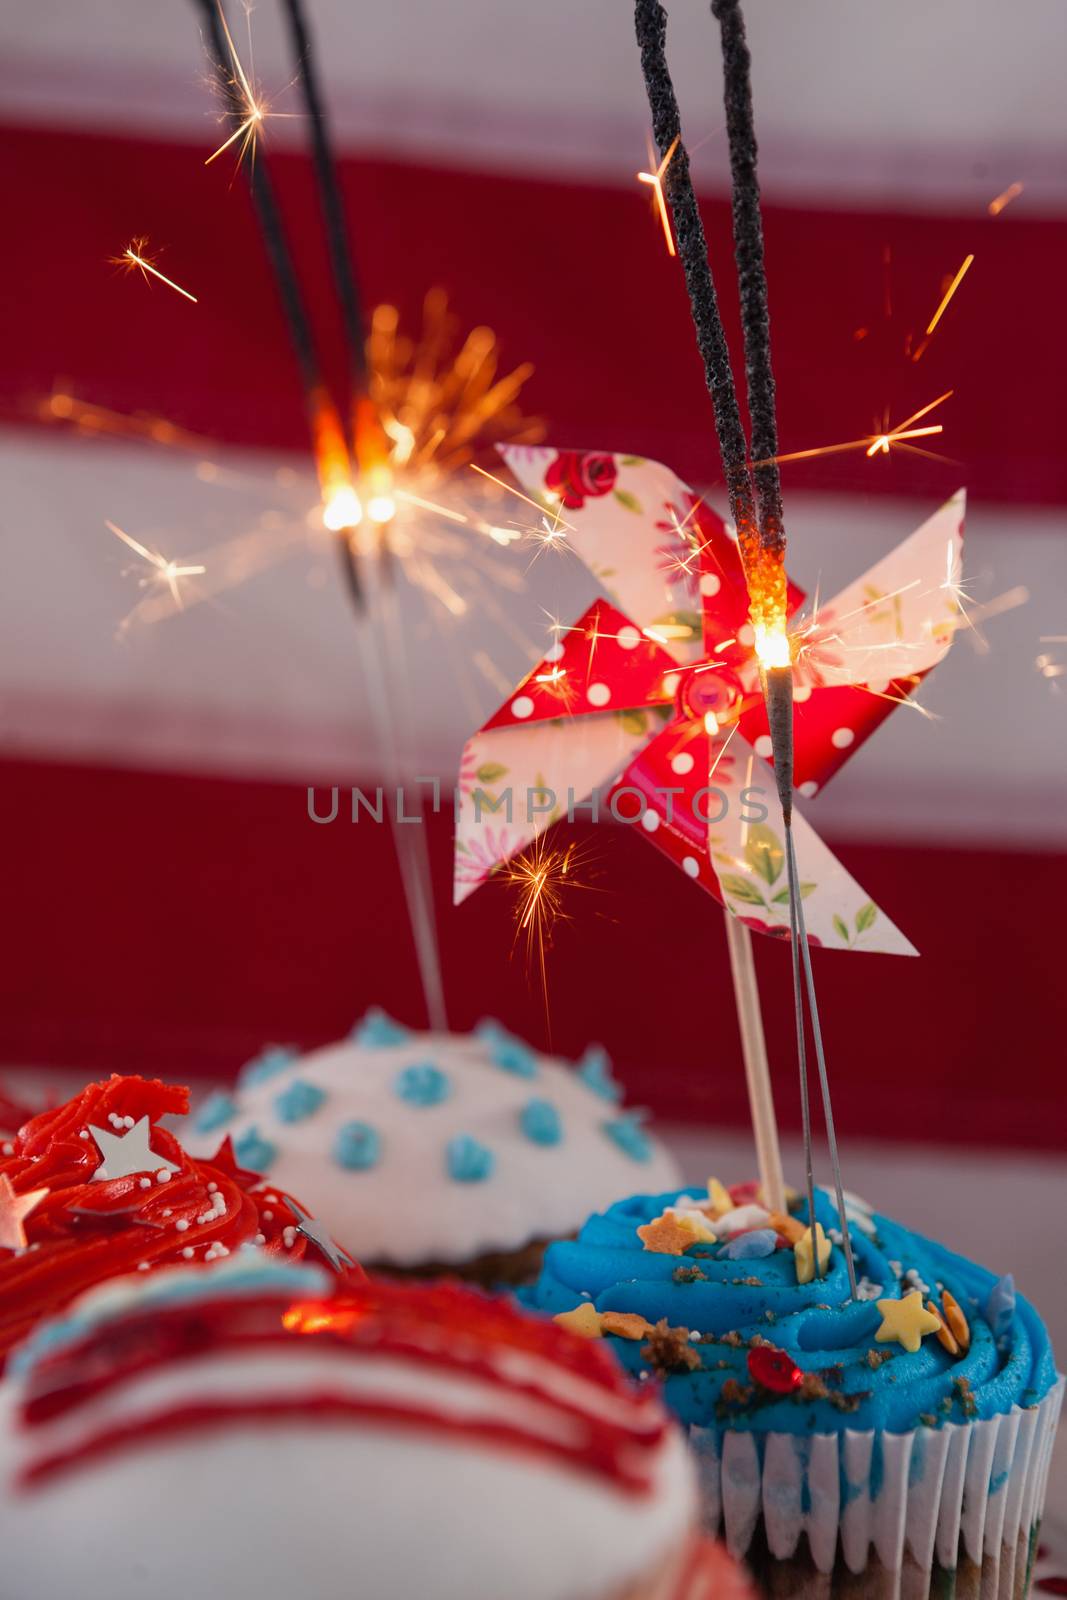 Close-up of burning sparkler on decorated cupcakes by Wavebreakmedia